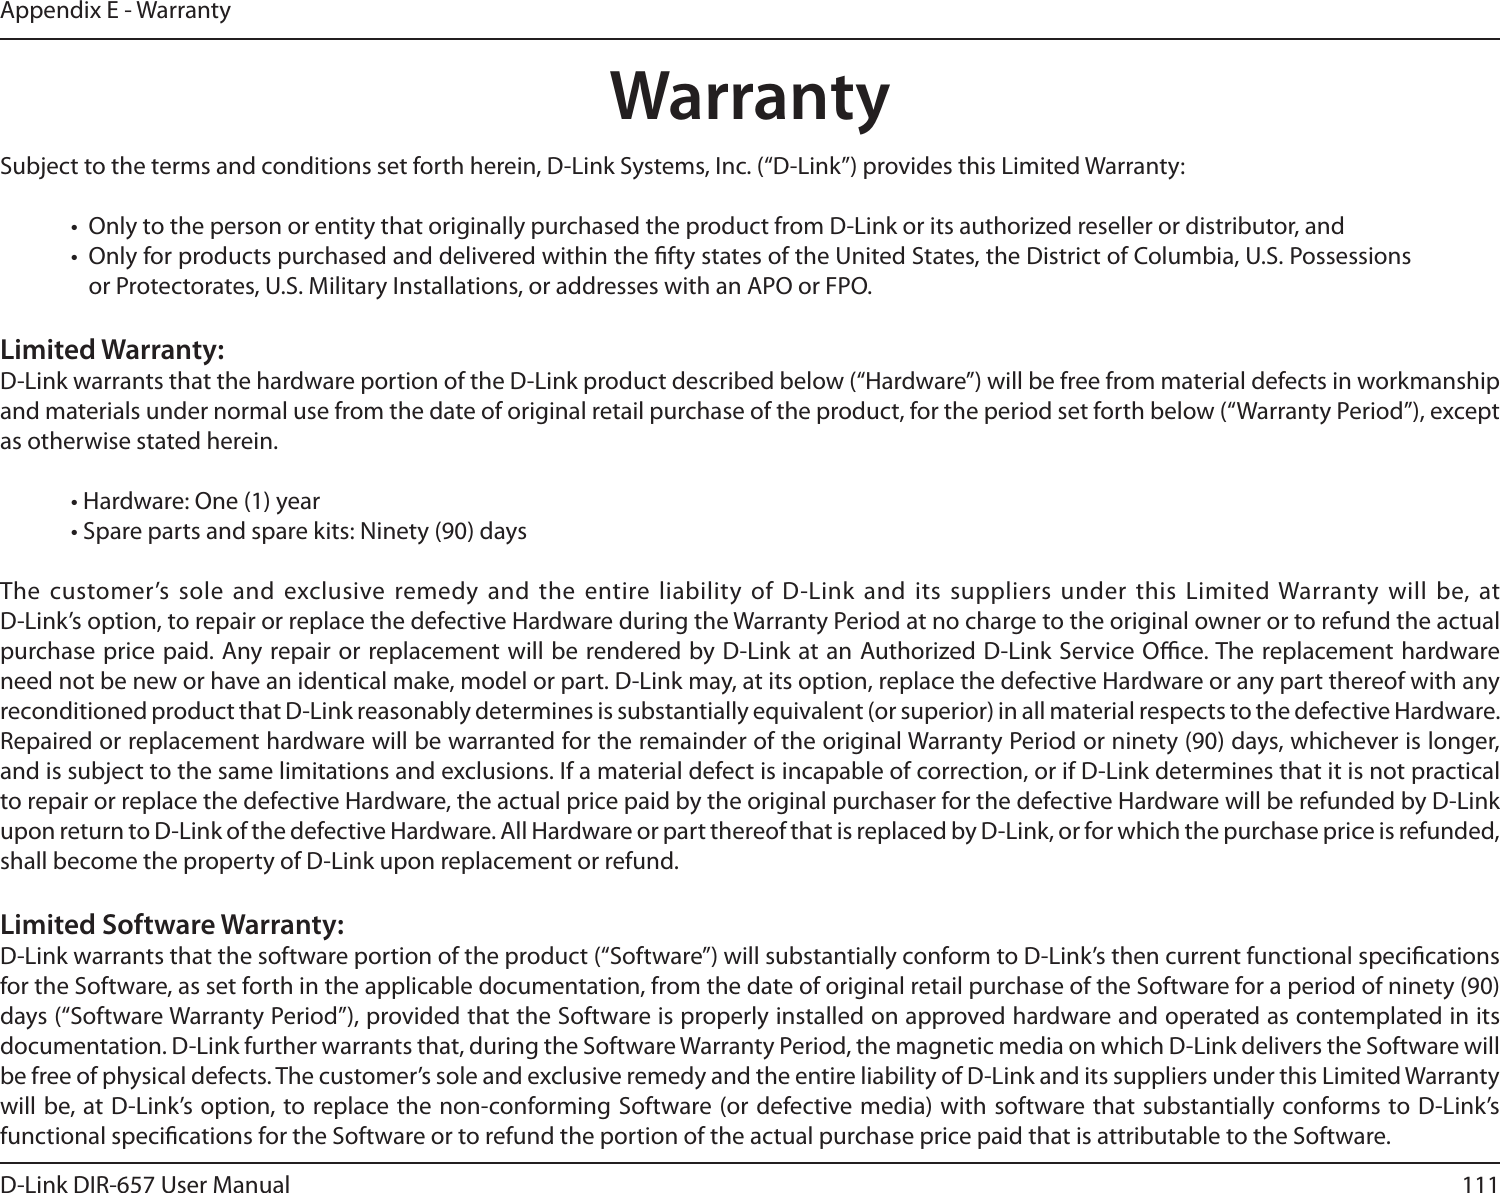 111D-Link DIR-657 User ManualAppendix E - WarrantyWarrantySubject to the terms and conditions set forth herein, D-Link Systems, Inc. (“D-Link”) provides this Limited Warranty:•  Only to the person or entity that originally purchased the product from D-Link or its authorized reseller or distributor, and•  Only for products purchased and delivered within the fty states of the United States, the District of Columbia, U.S. Possessions or Protectorates, U.S. Military Installations, or addresses with an APO or FPO.Limited Warranty:D-Link warrants that the hardware portion of the D-Link product described below (“Hardware”) will be free from material defects in workmanship and materials under normal use from the date of original retail purchase of the product, for the period set forth below (“Warranty Period”), except as otherwise stated herein.• Hardware: One (1) year• Spare parts and spare kits: Ninety (90) daysThe customer’s sole and  exclusive remedy and the entire liability of D-Link and  its suppliers under  this Limited Warranty  will be, at  D-Link’s option, to repair or replace the defective Hardware during the Warranty Period at no charge to the original owner or to refund the actual purchase price paid. Any repair or replacement will be rendered by D-Link at an Authorized D-Link Service Oce. The replacement hardware need not be new or have an identical make, model or part. D-Link may, at its option, replace the defective Hardware or any part thereof with any reconditioned product that D-Link reasonably determines is substantially equivalent (or superior) in all material respects to the defective Hardware. Repaired or replacement hardware will be warranted for the remainder of the original Warranty Period or ninety (90) days, whichever is longer, and is subject to the same limitations and exclusions. If a material defect is incapable of correction, or if D-Link determines that it is not practical to repair or replace the defective Hardware, the actual price paid by the original purchaser for the defective Hardware will be refunded by D-Link upon return to D-Link of the defective Hardware. All Hardware or part thereof that is replaced by D-Link, or for which the purchase price is refunded, shall become the property of D-Link upon replacement or refund.Limited Software Warranty:D-Link warrants that the software portion of the product (“Software”) will substantially conform to D-Link’s then current functional specications for the Software, as set forth in the applicable documentation, from the date of original retail purchase of the Software for a period of ninety (90) days (“Software Warranty Period”), provided that the Software is properly installed on approved hardware and operated as contemplated in its documentation. D-Link further warrants that, during the Software Warranty Period, the magnetic media on which D-Link delivers the Software will be free of physical defects. The customer’s sole and exclusive remedy and the entire liability of D-Link and its suppliers under this Limited Warranty will be, at D-Link’s option, to replace the non-conforming Software (or  defective media) with software that substantially conforms to D-Link’s functional specications for the Software or to refund the portion of the actual purchase price paid that is attributable to the Software. 